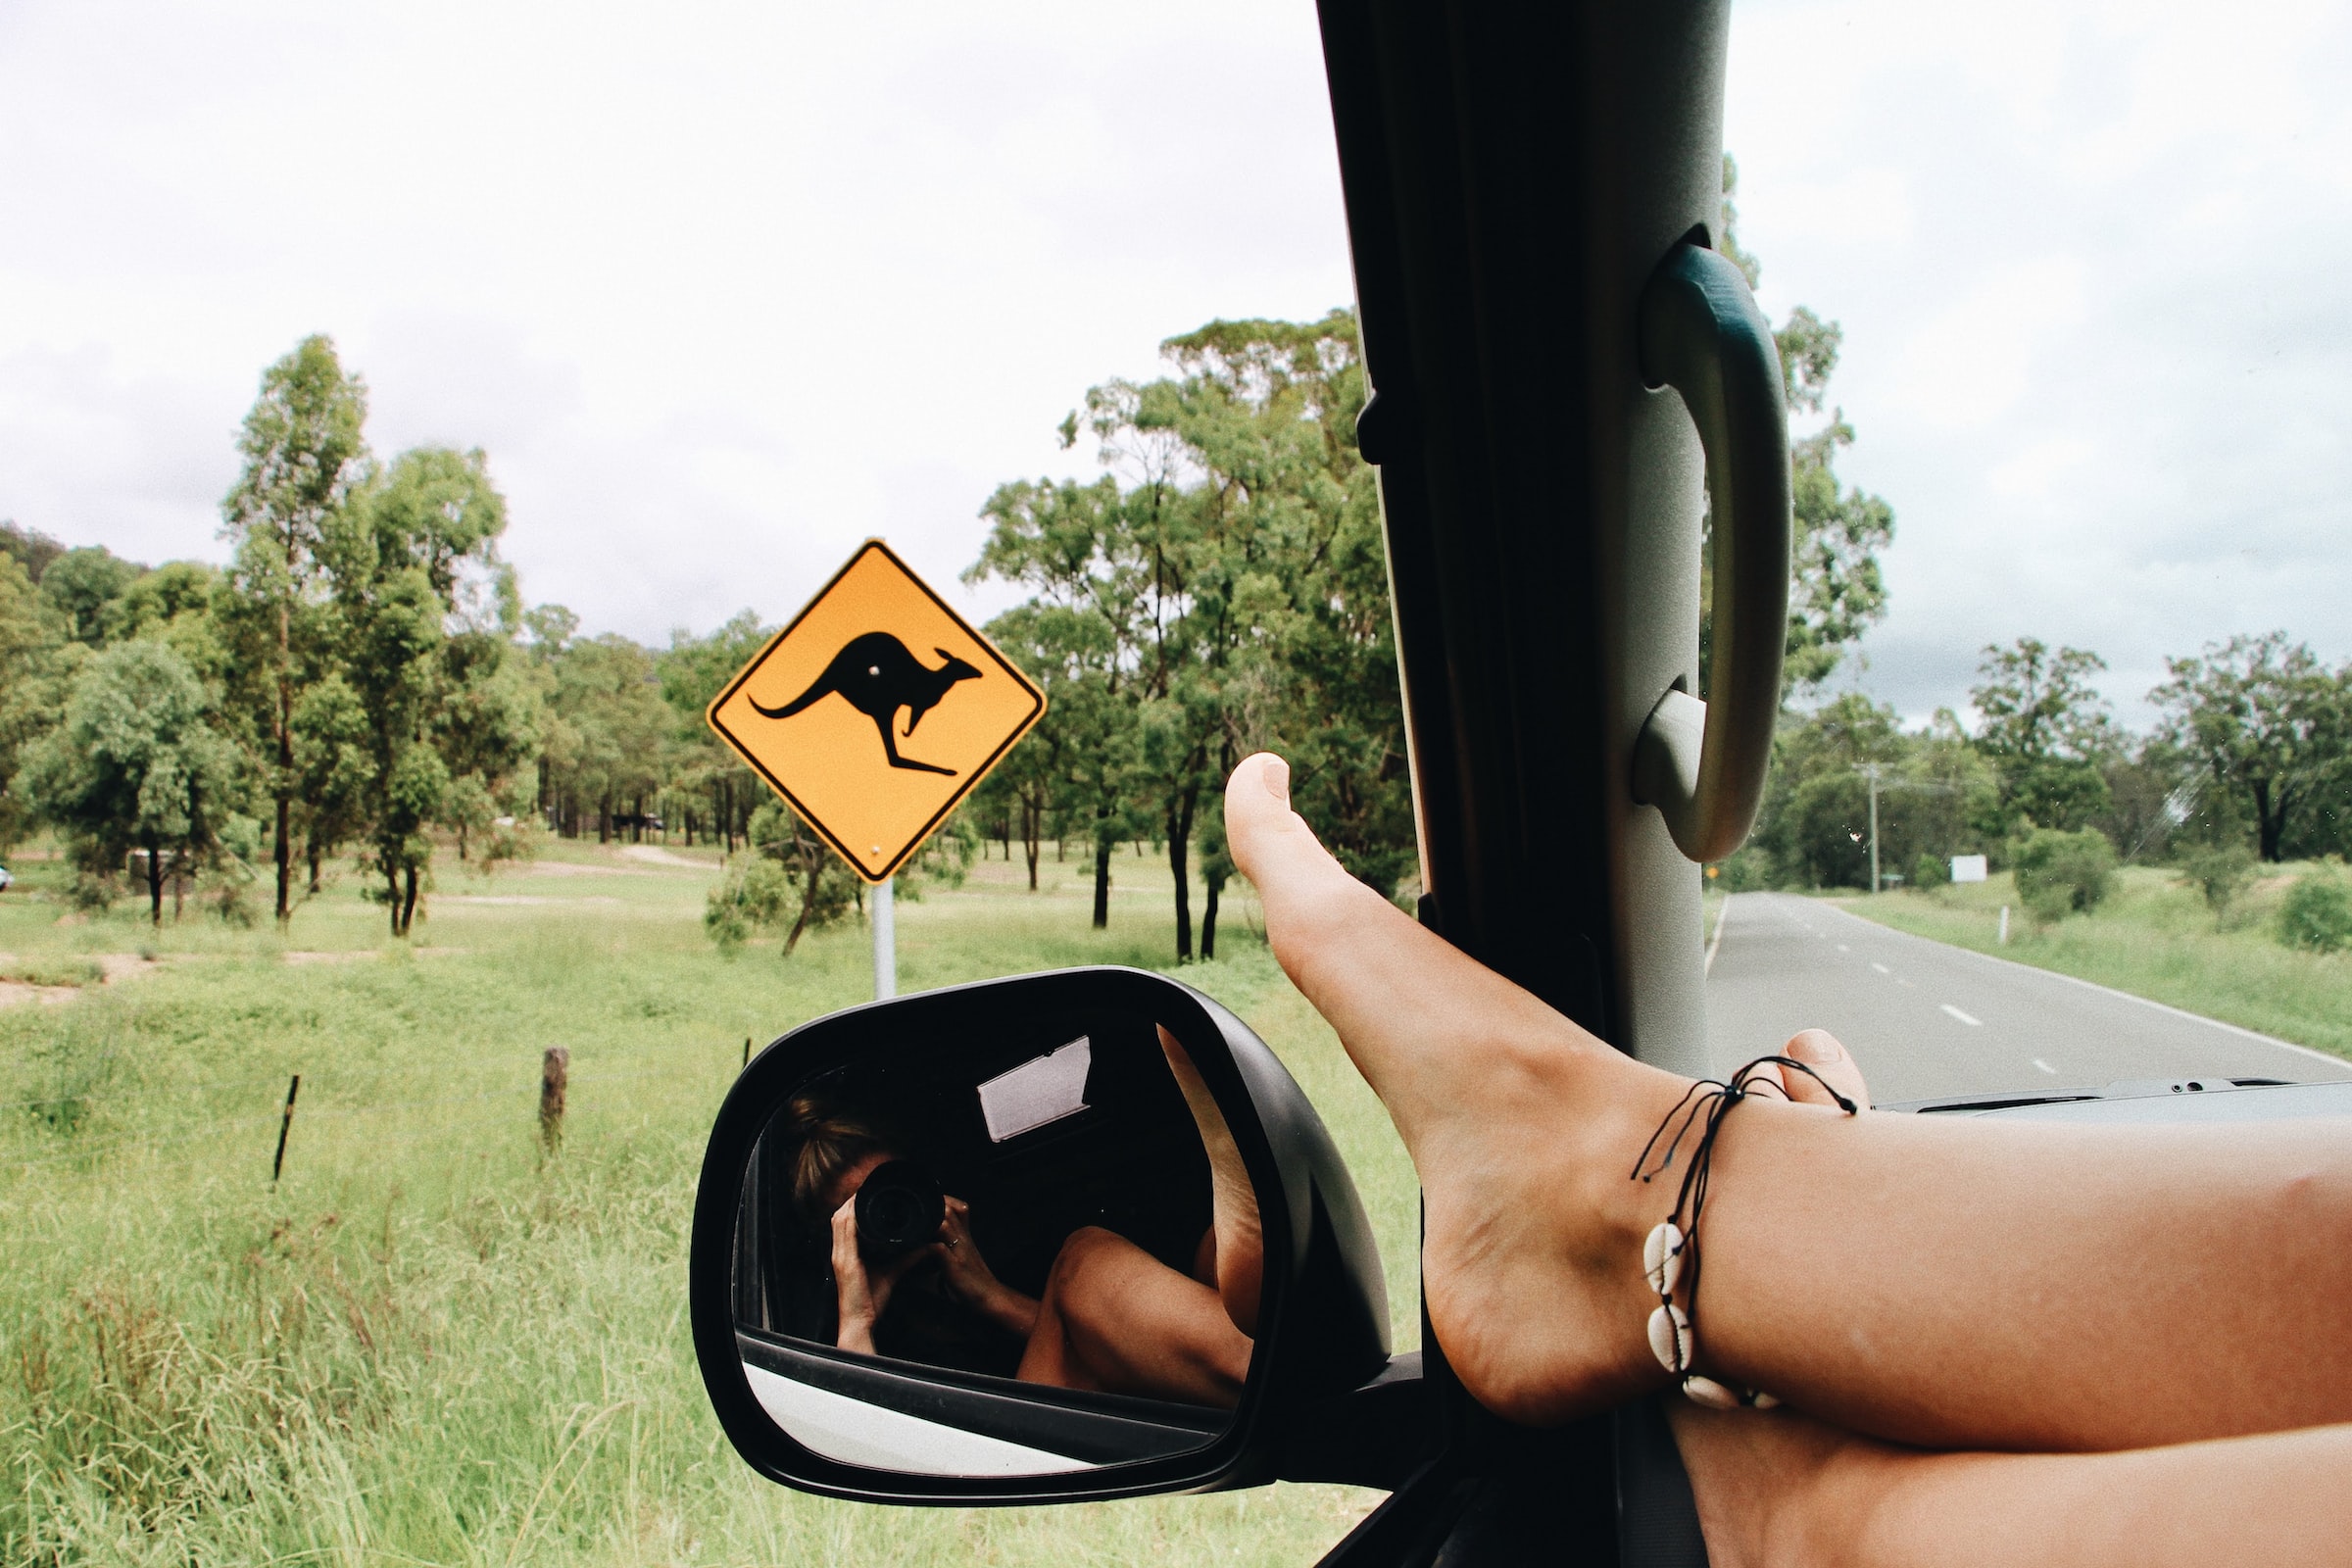 A car is on a road, inside of it there is a girl relaxed, who is taking a picture to a road kangaroo sign.